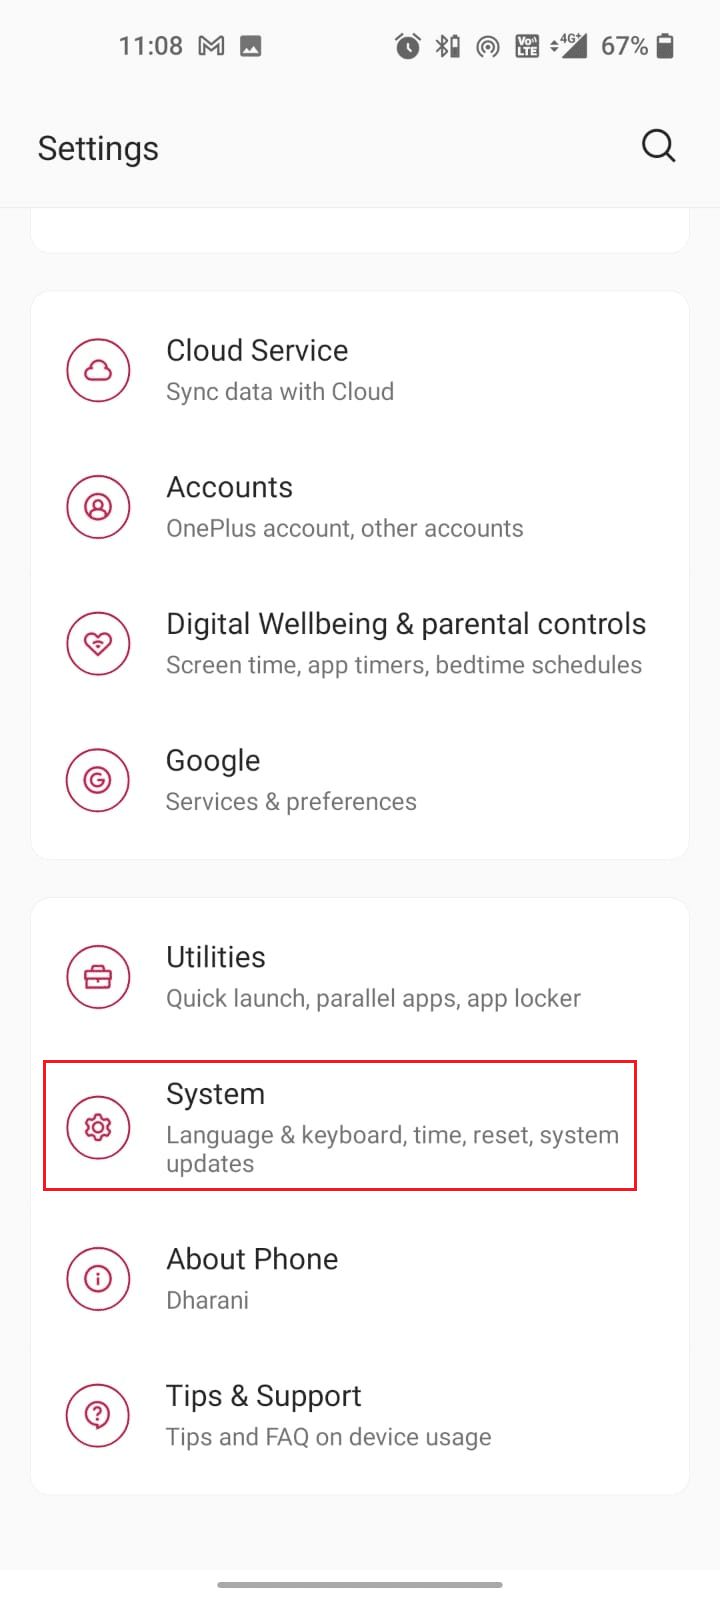 Now, tap the System option in the Settings window.